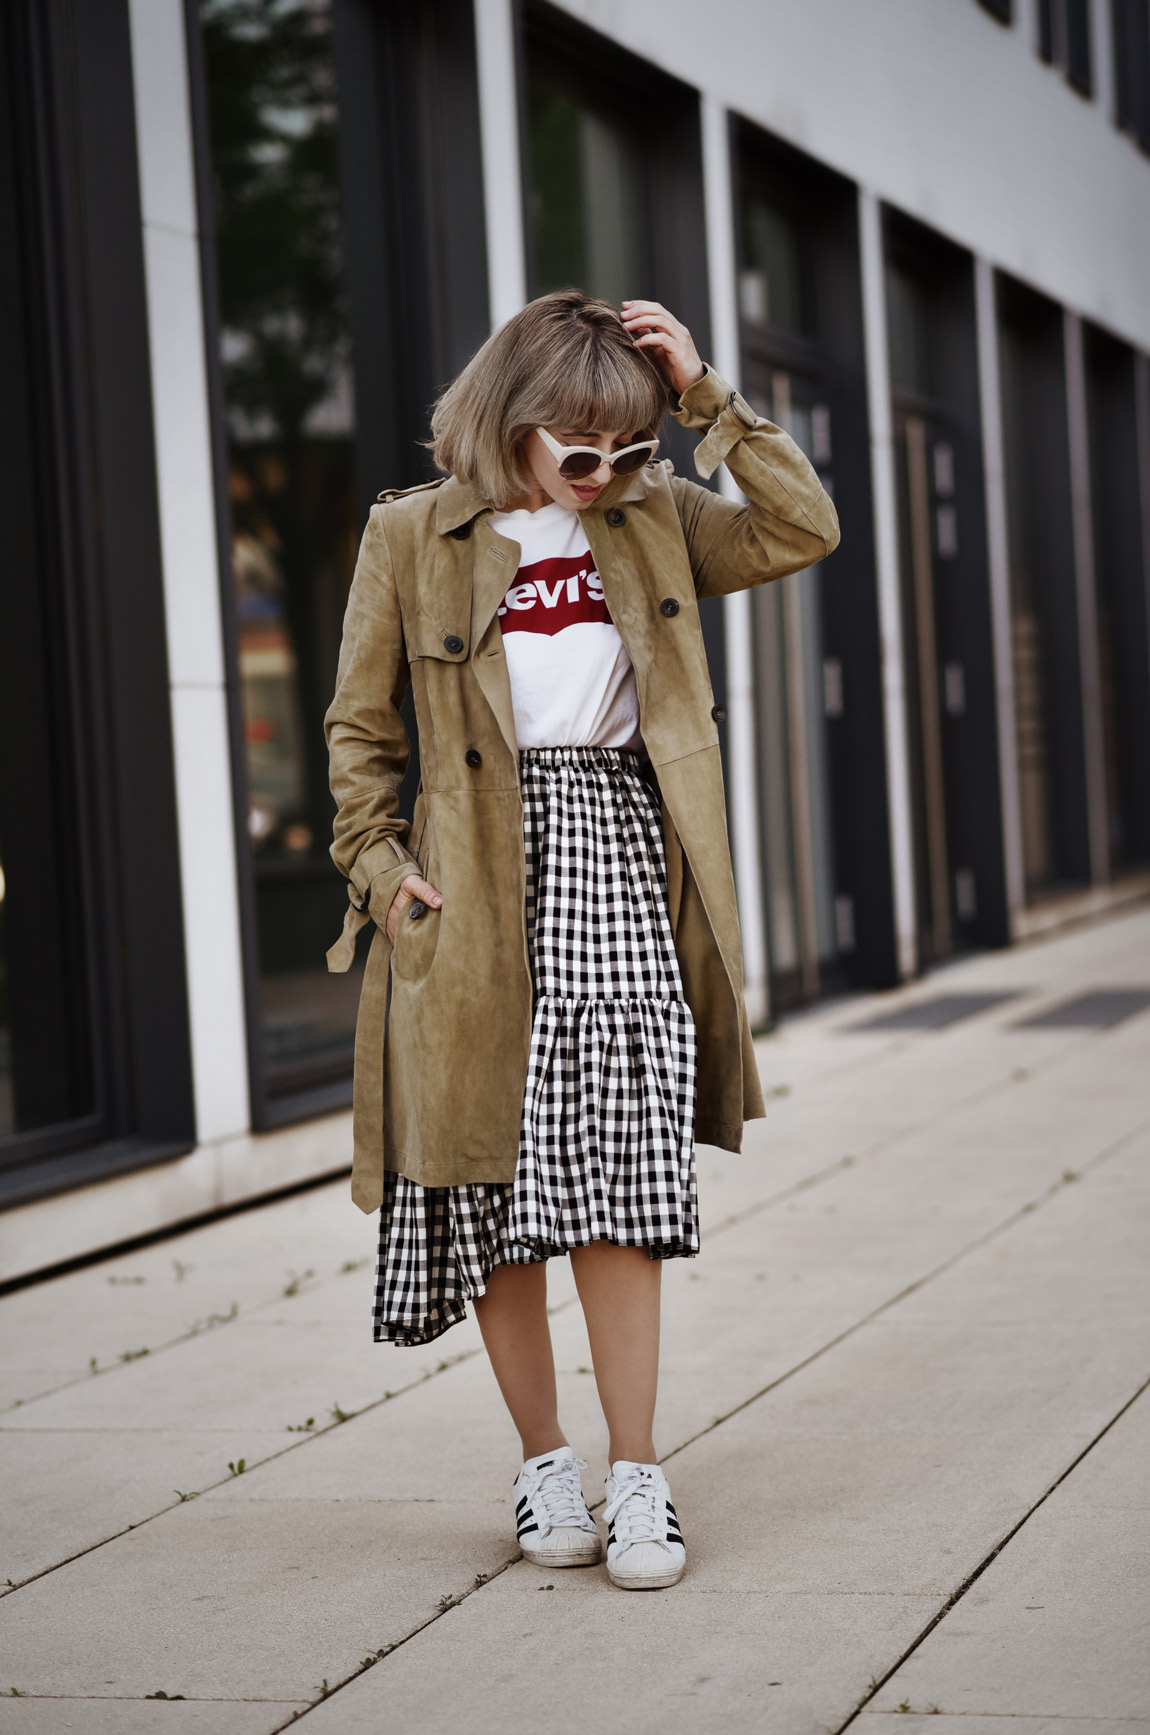 wildleder, suede, trenchcoat, outfit, fashionblogger, modeblogger, streetstyle, muenchen, kariert, rock